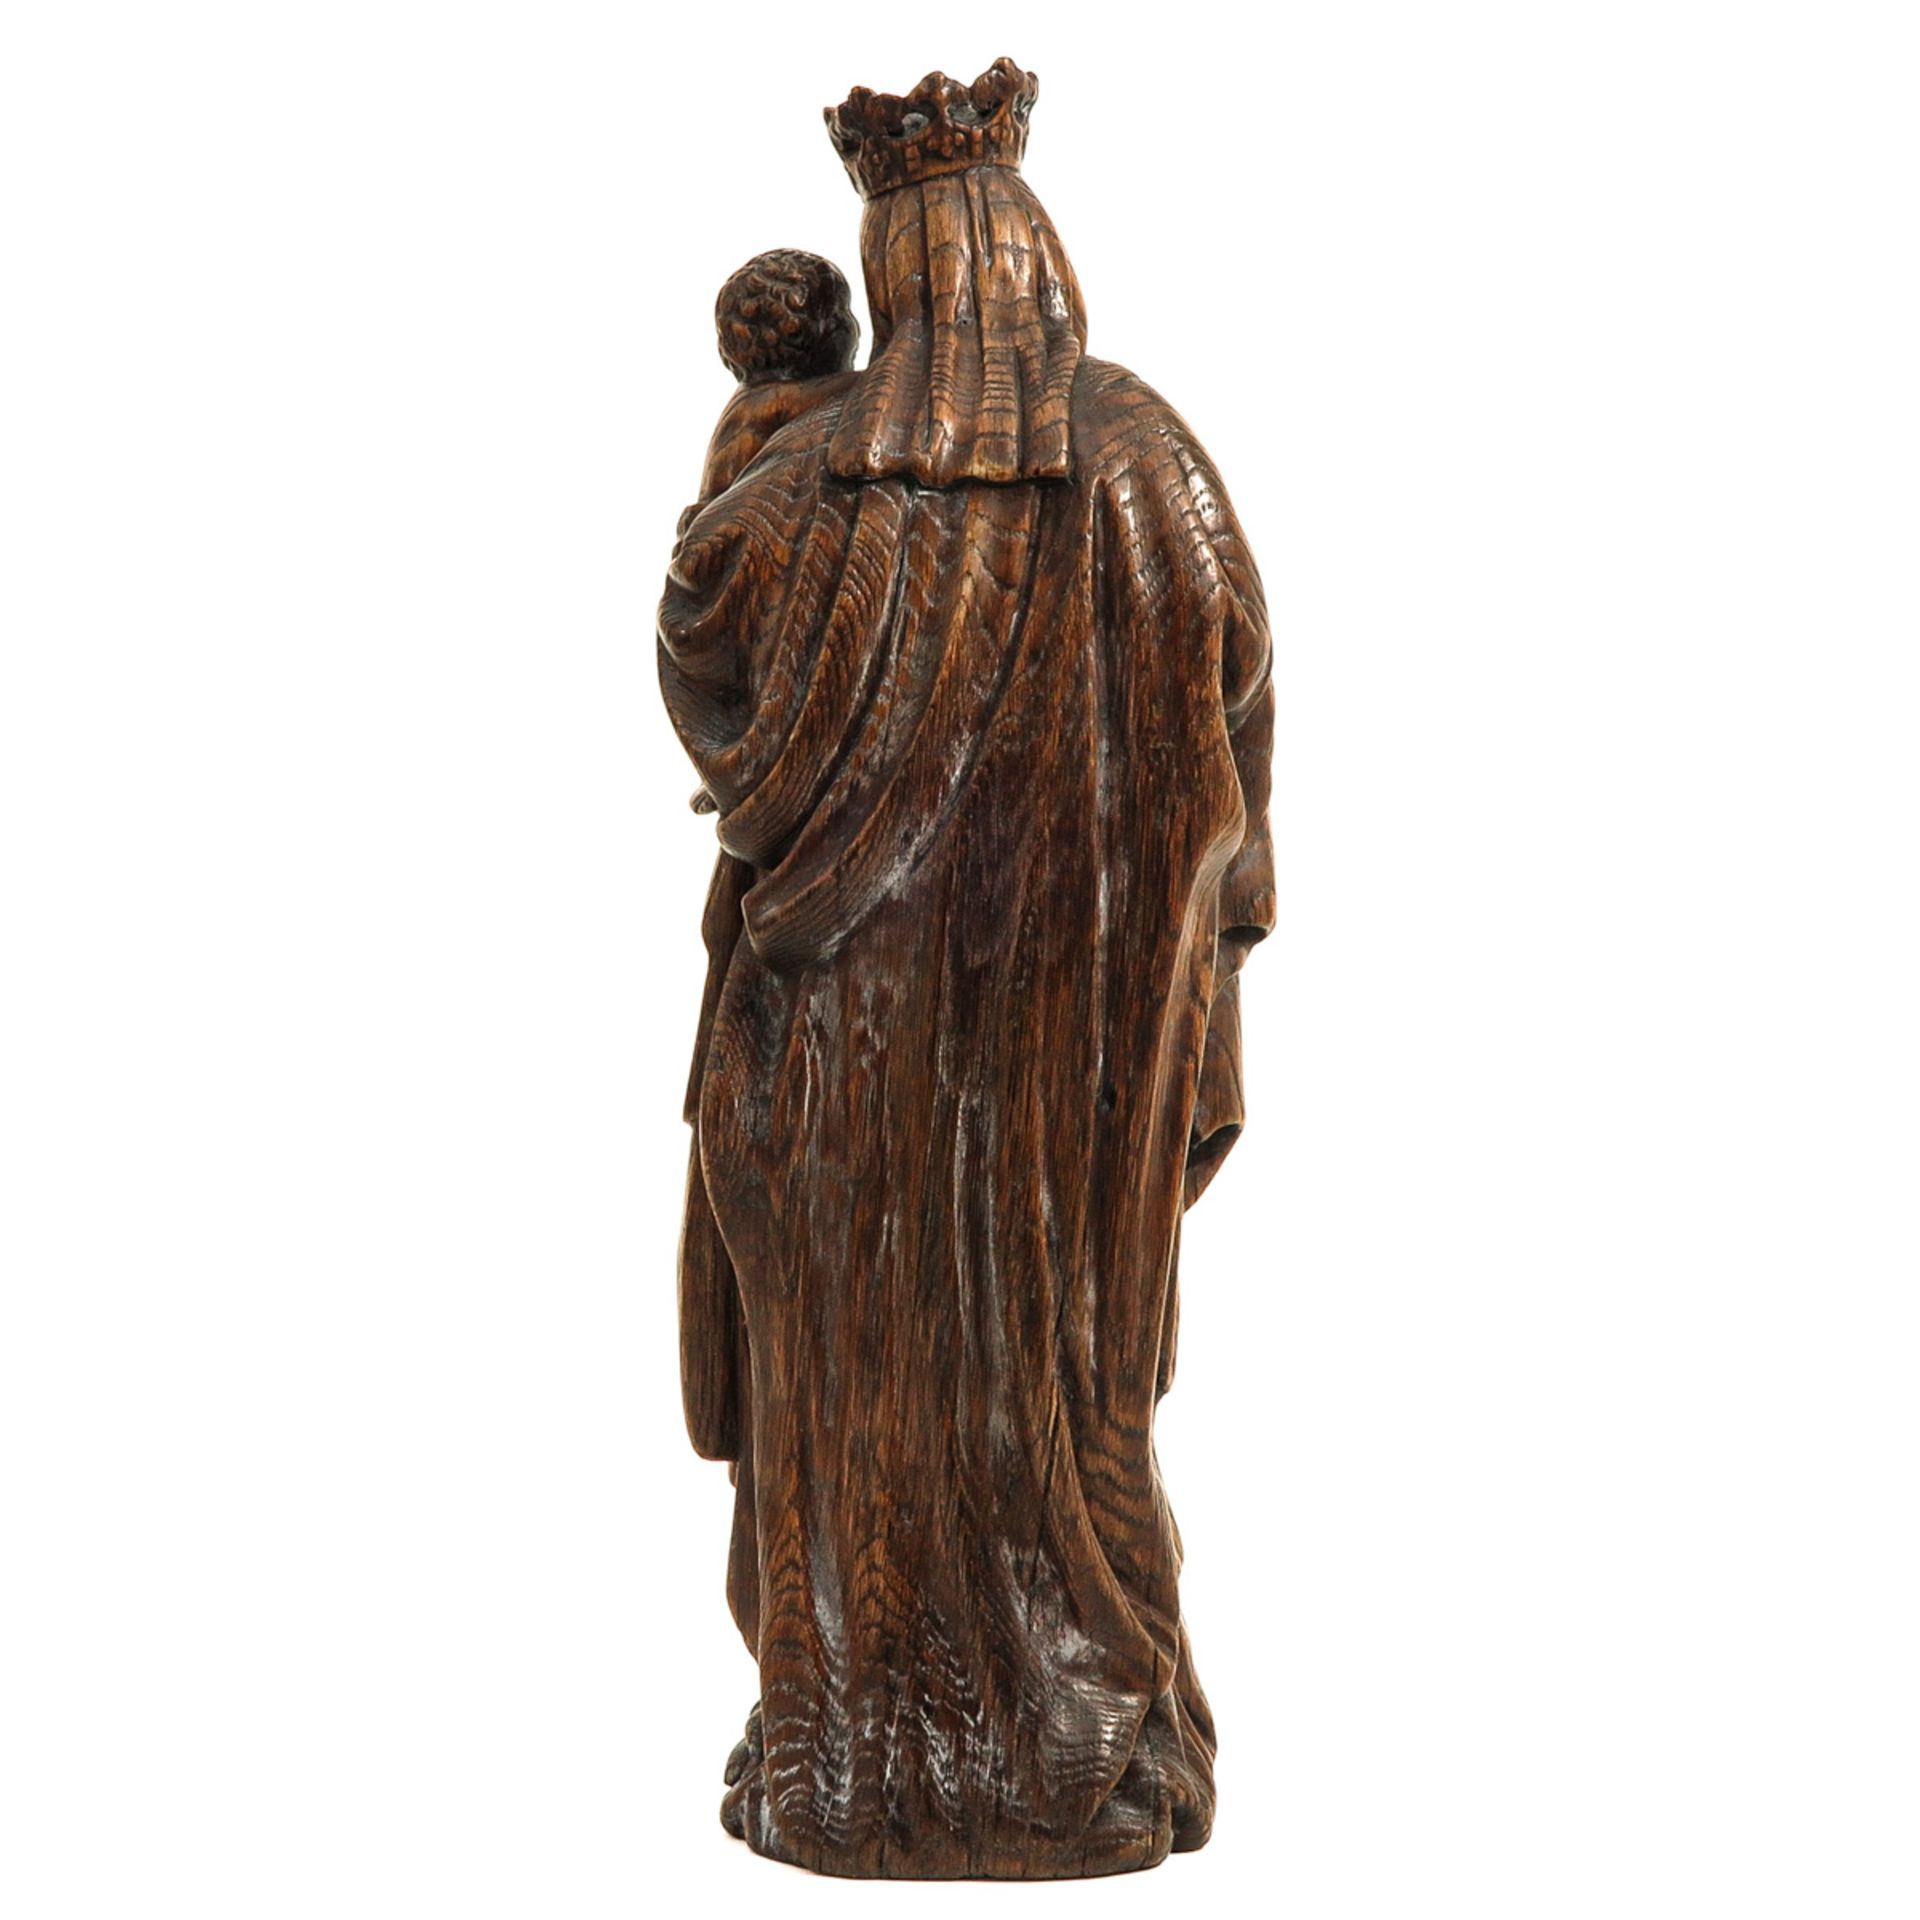 A Wood Sculpture of Madonna with Child - Image 3 of 8